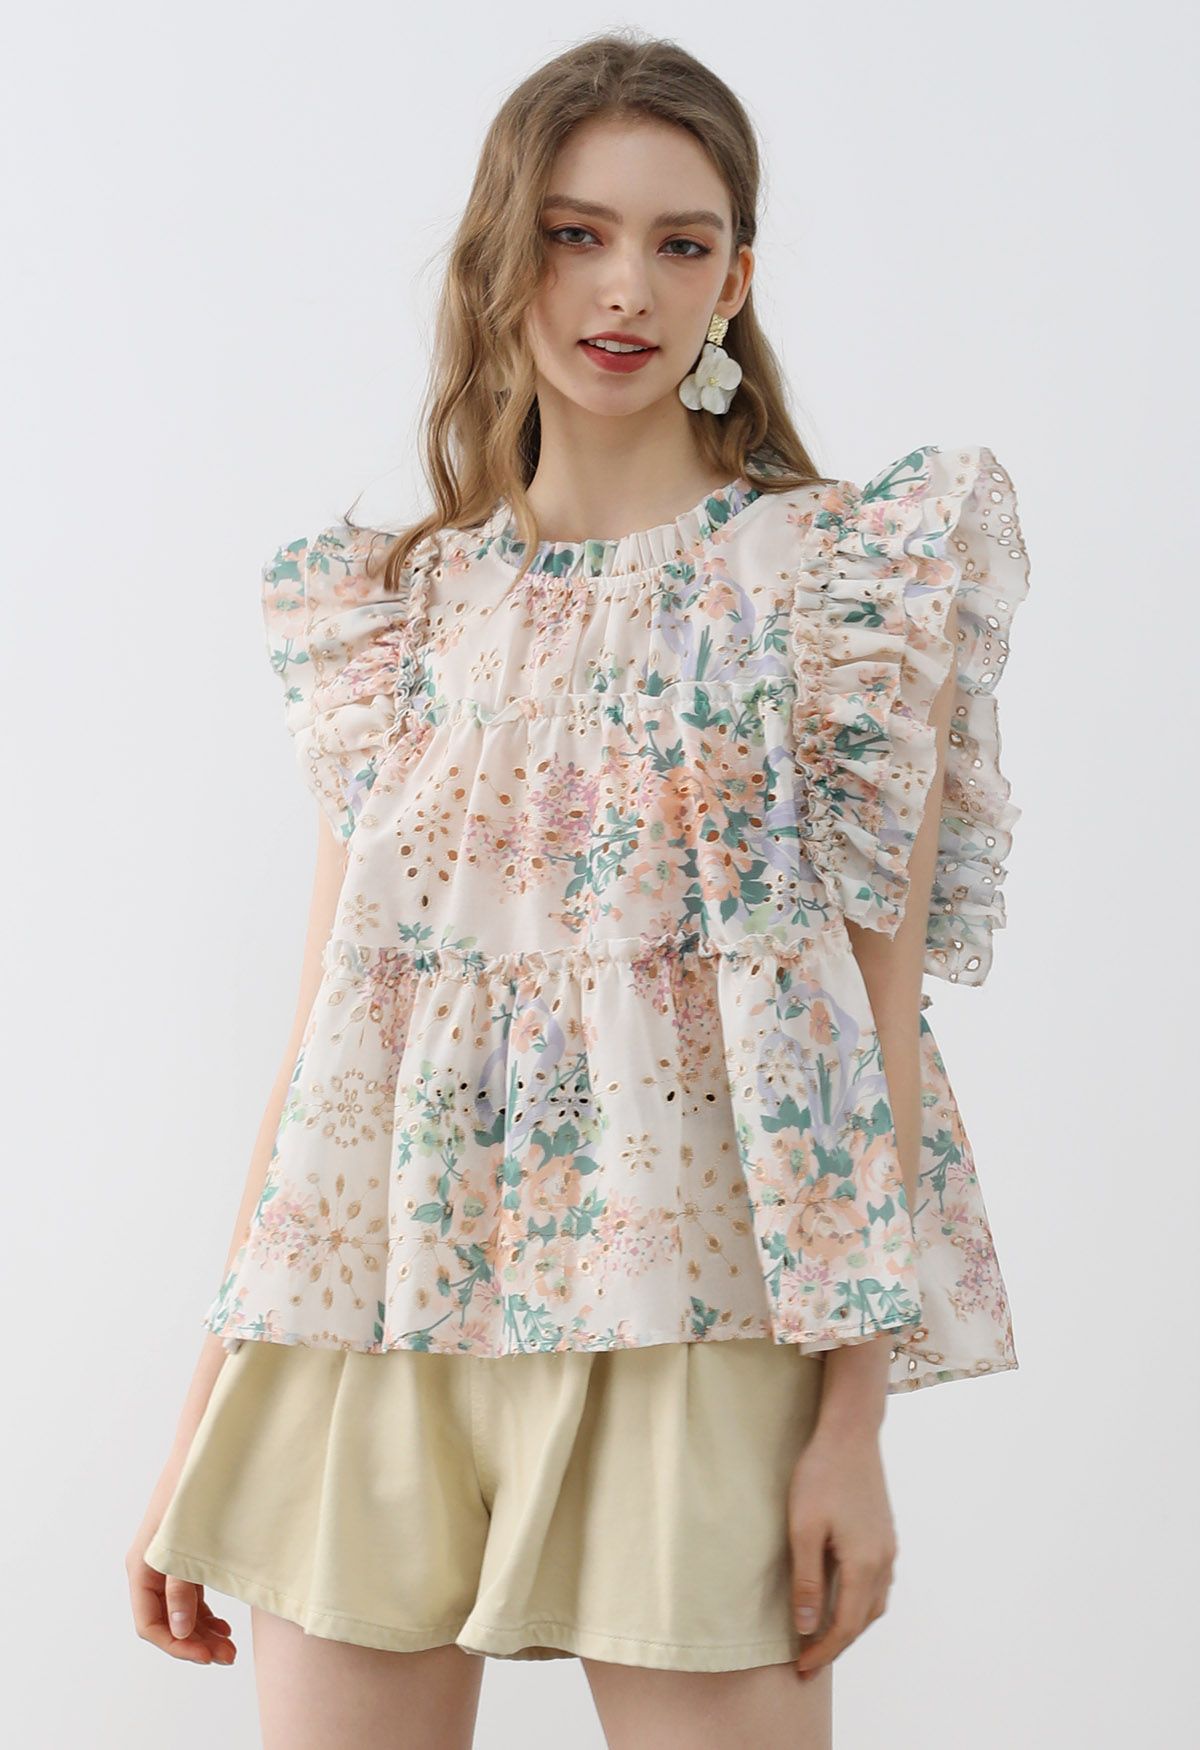 Metallic Embroidered Floral Print Sleeveless Dolly Top